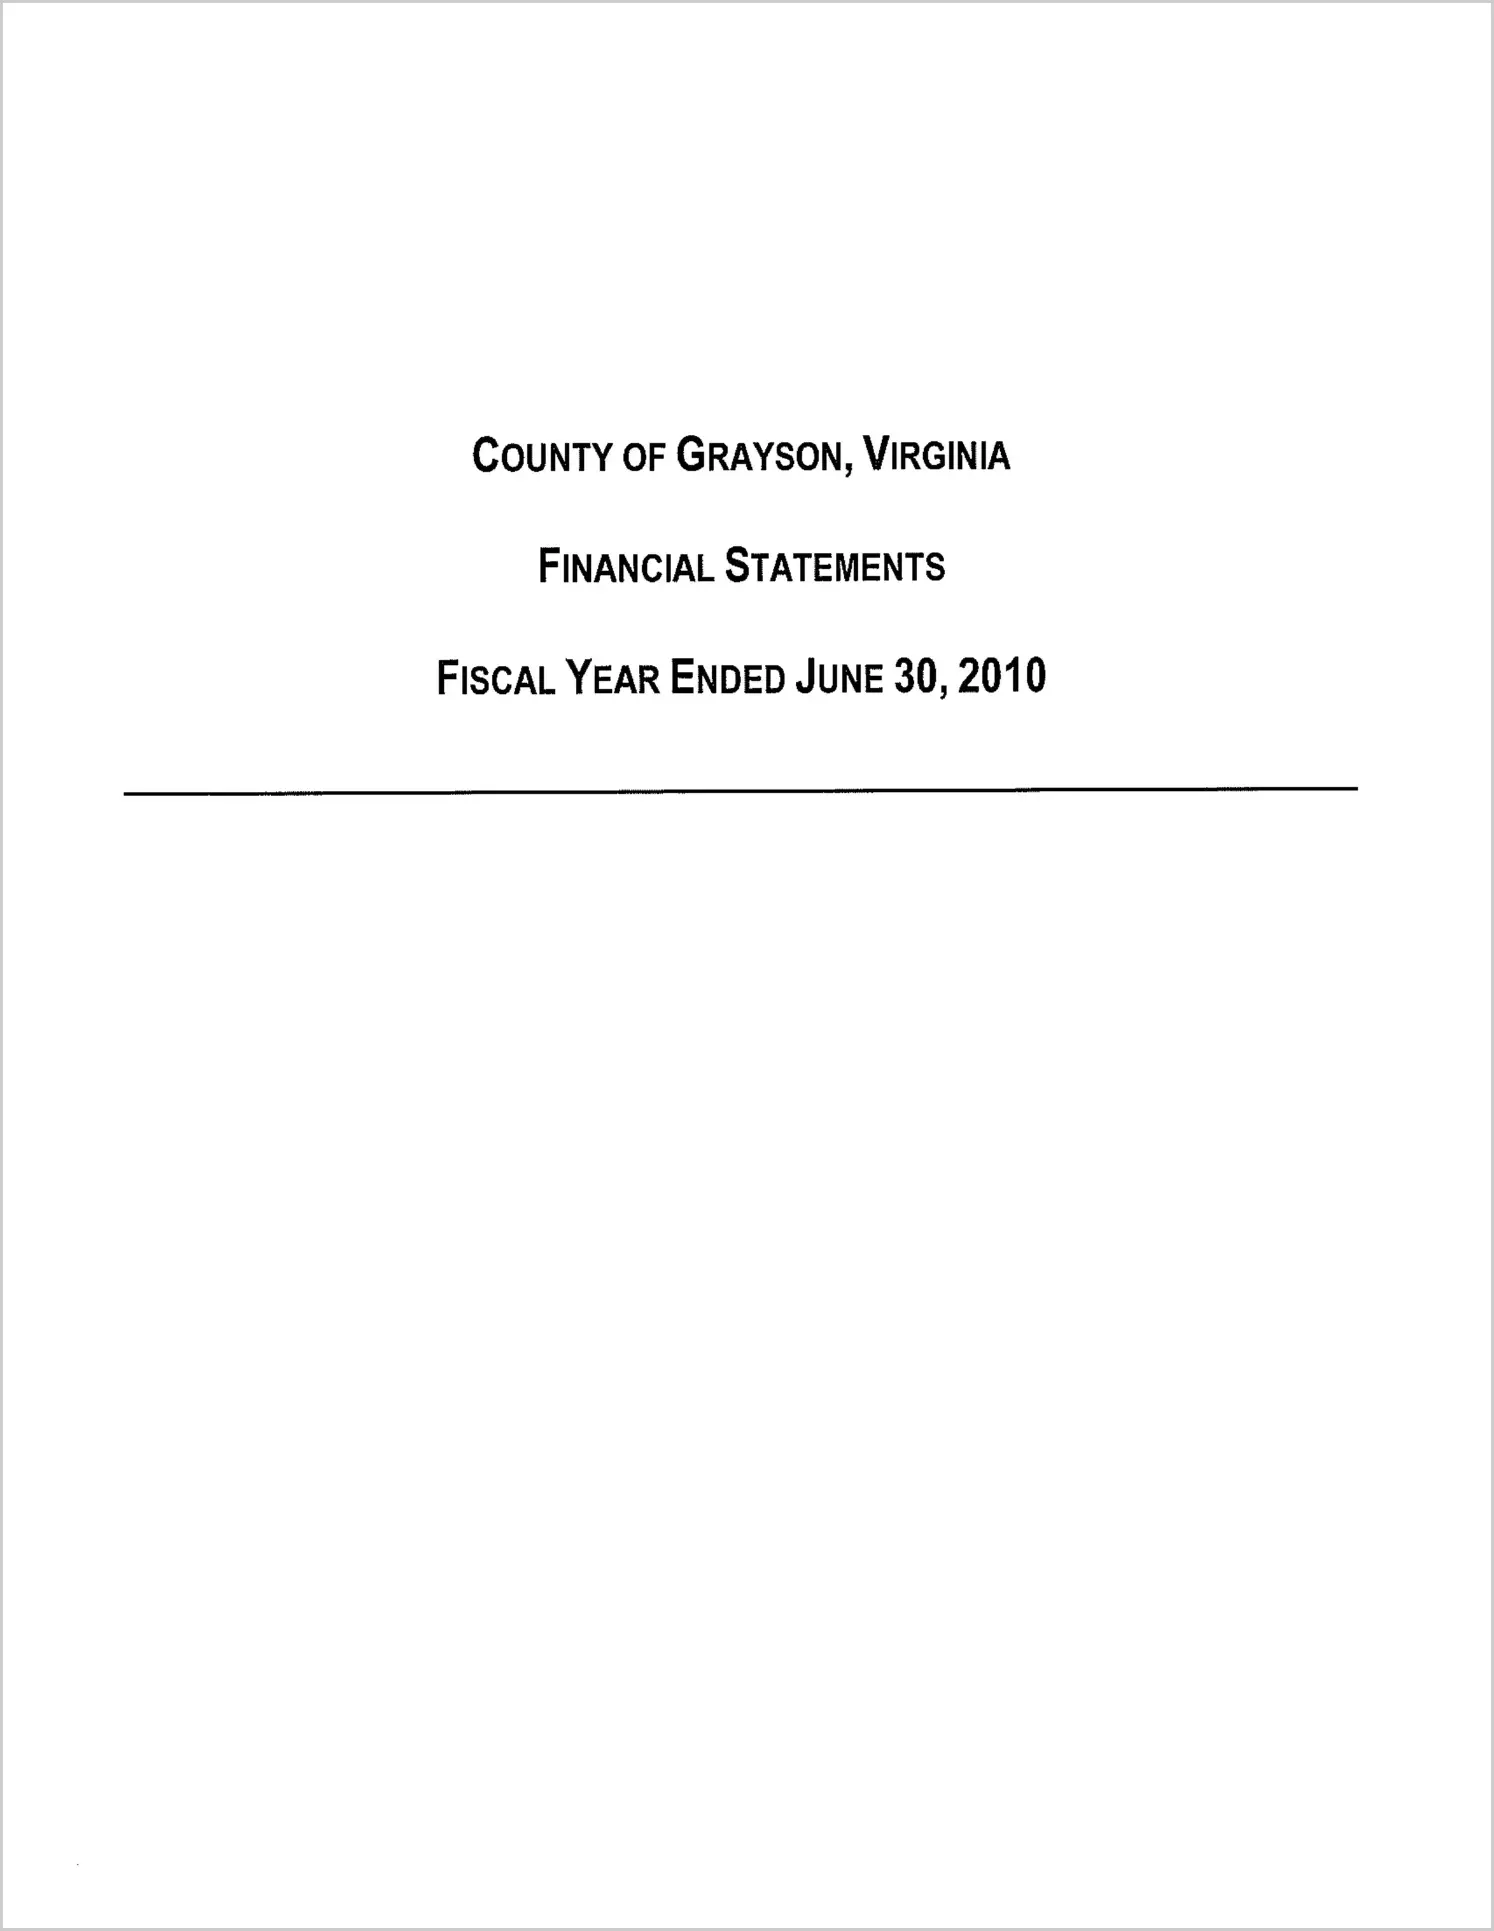 2010 Annual Financial Report for County of Grayson